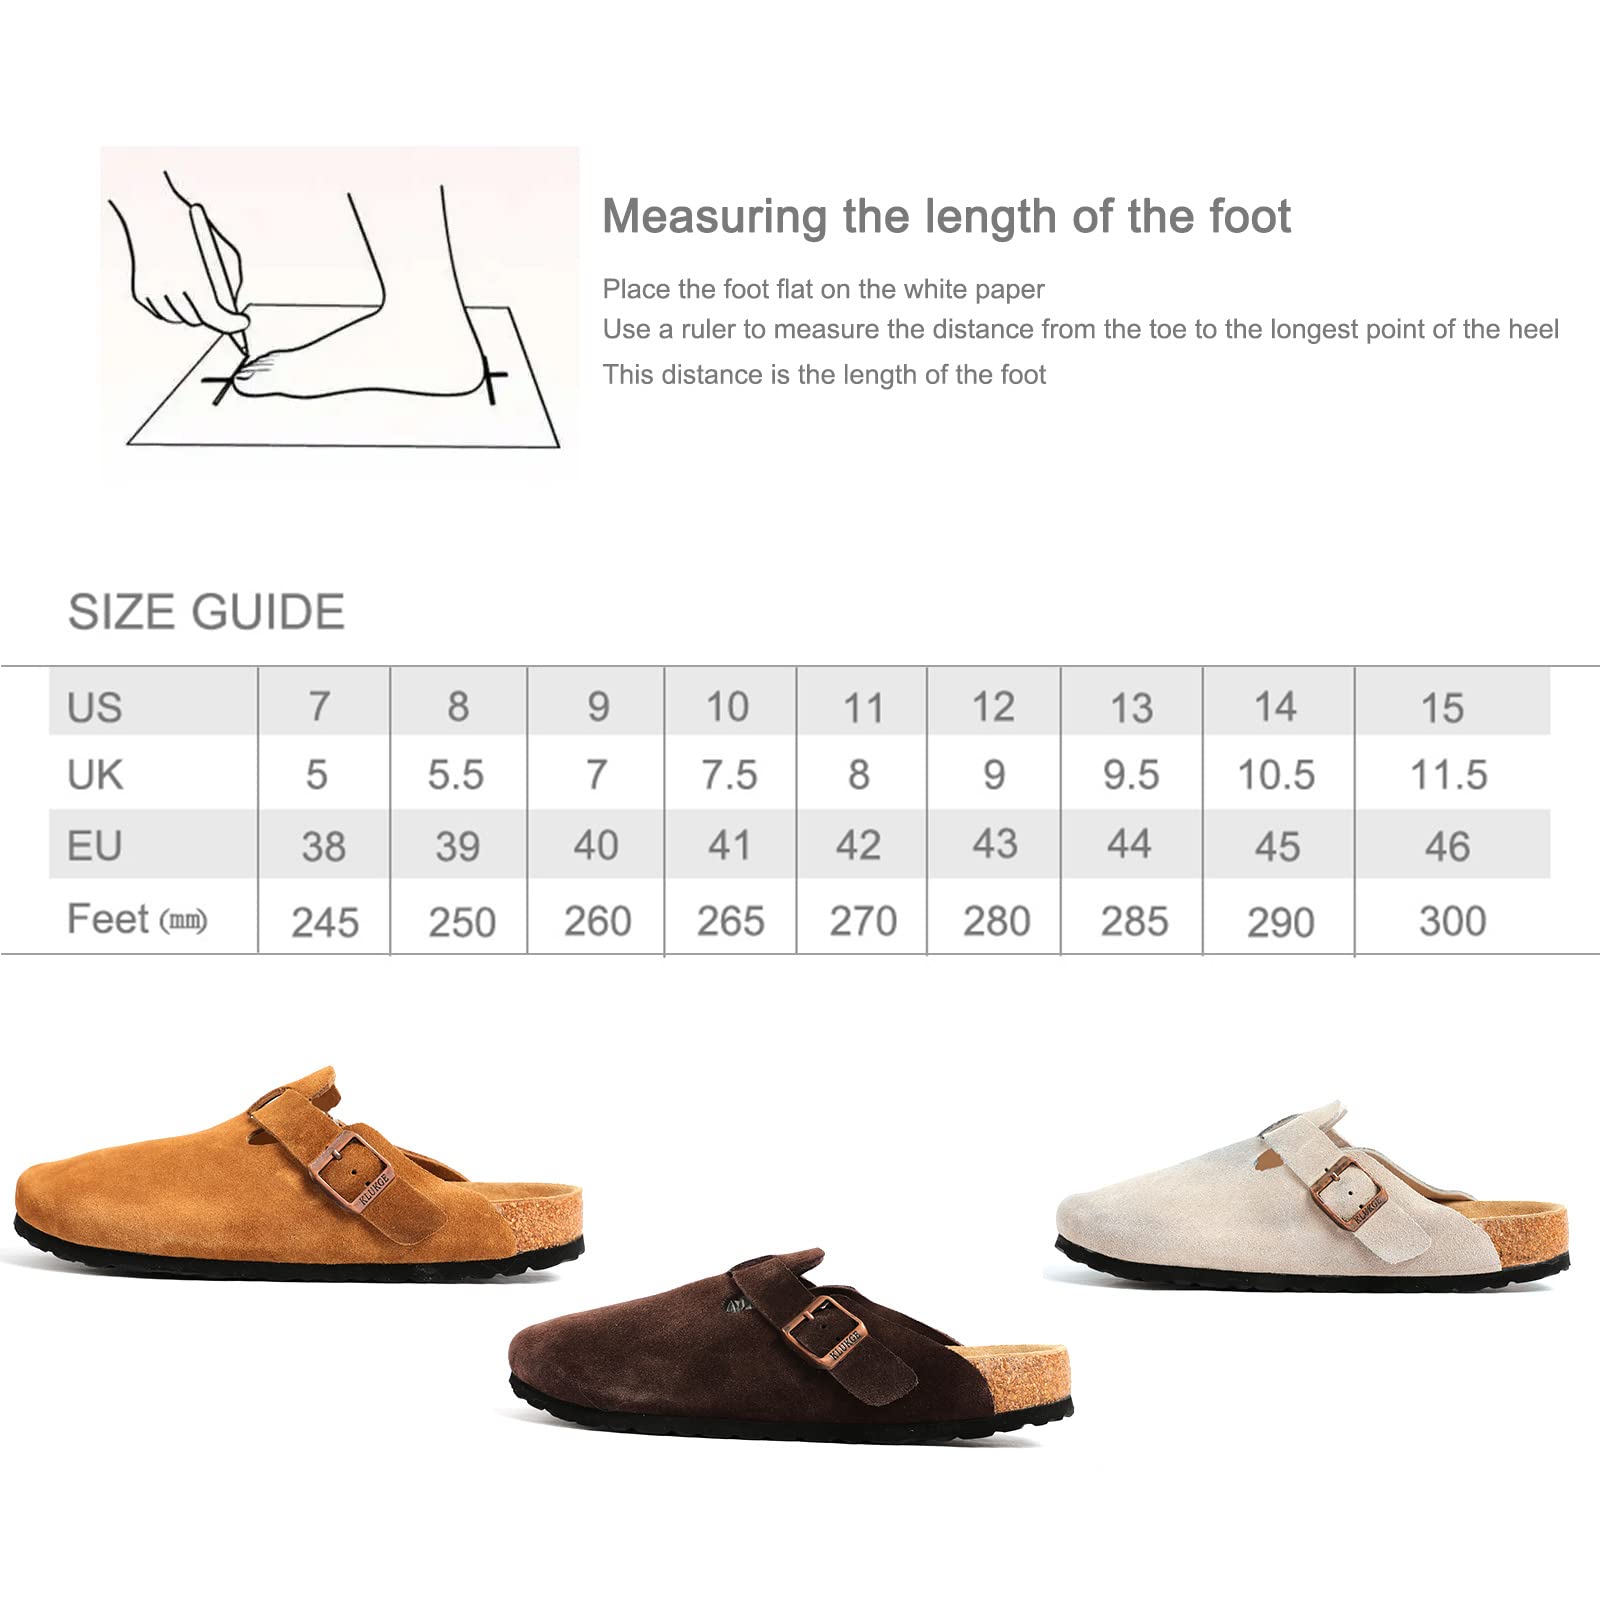 KLUKGE Boston Clogs for Men, Women‘s Suede Soft Leather Clogs Adjustable Buckle Cork Non-Slip Slippers Home Sandals Unisex Shoes